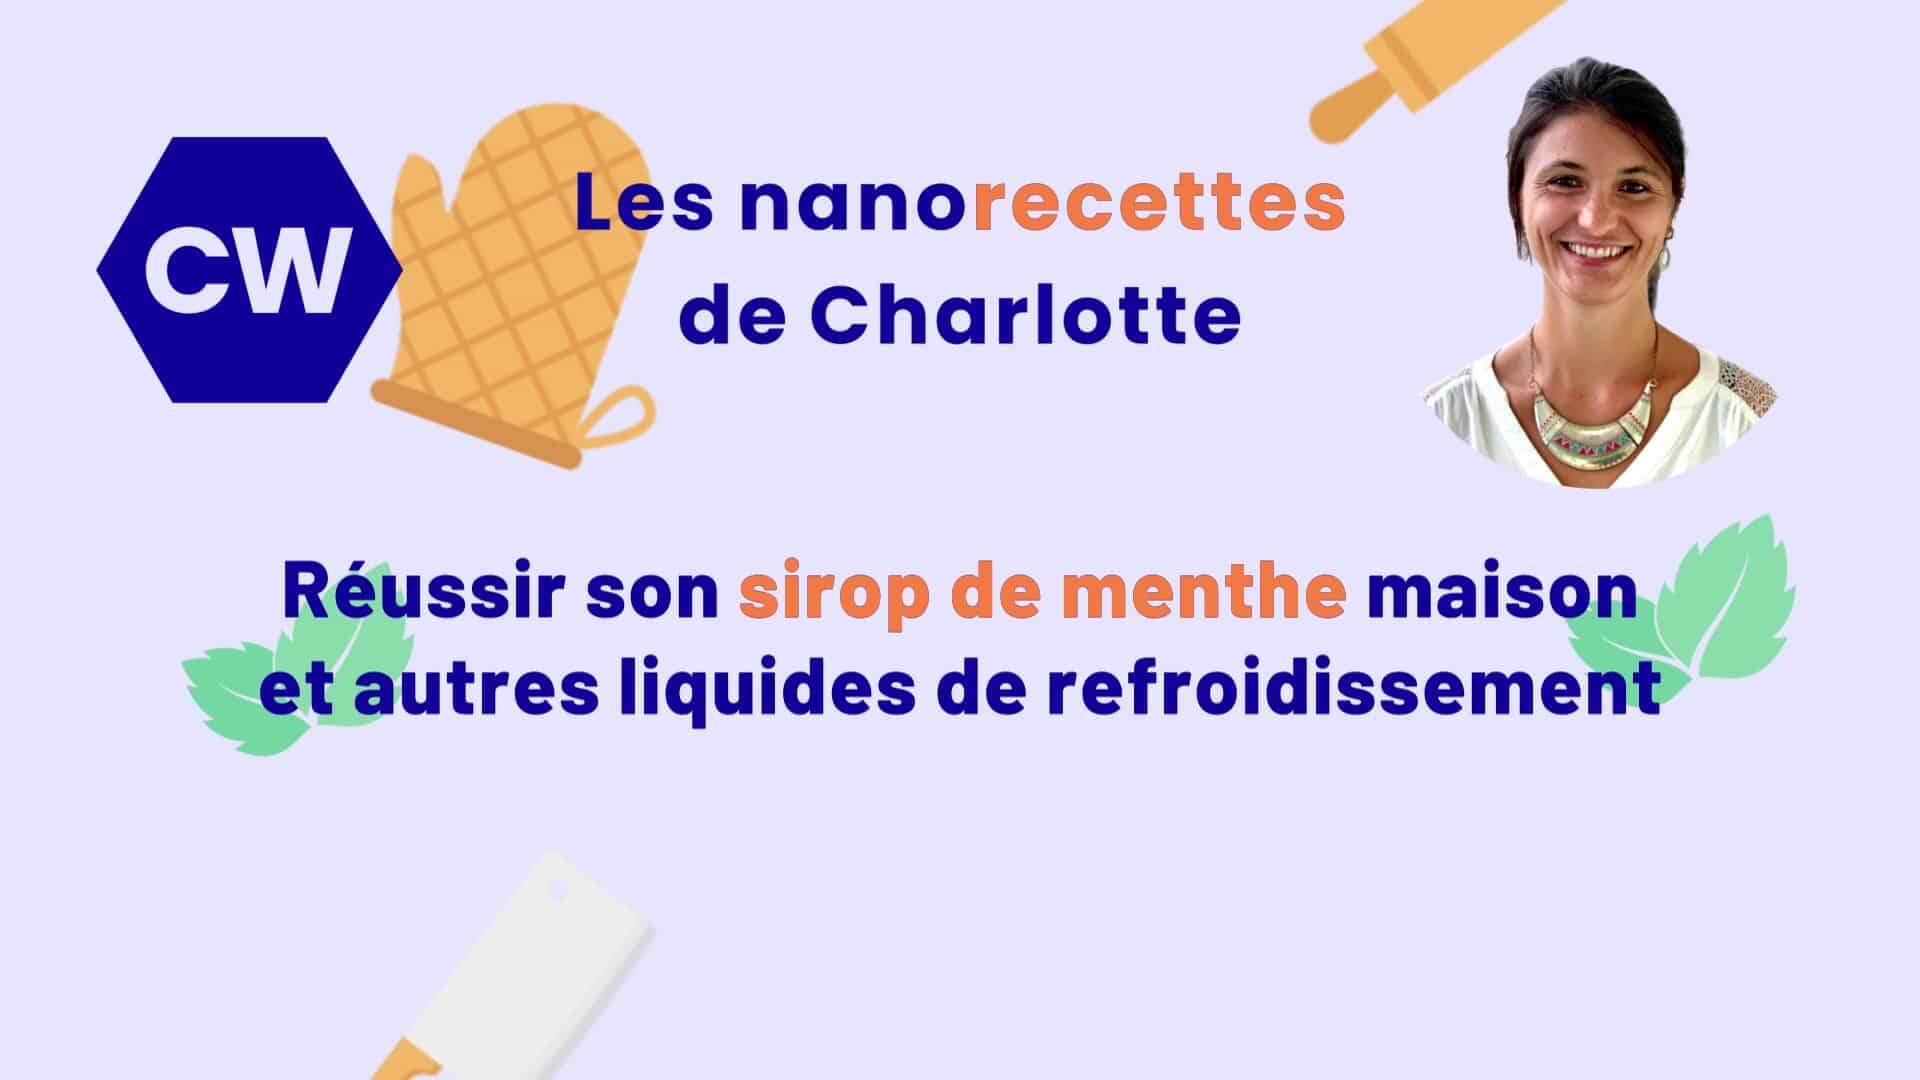 Charlotte’s nanorecipes: How to make a good mint syrup and other graphene-based cooling systems